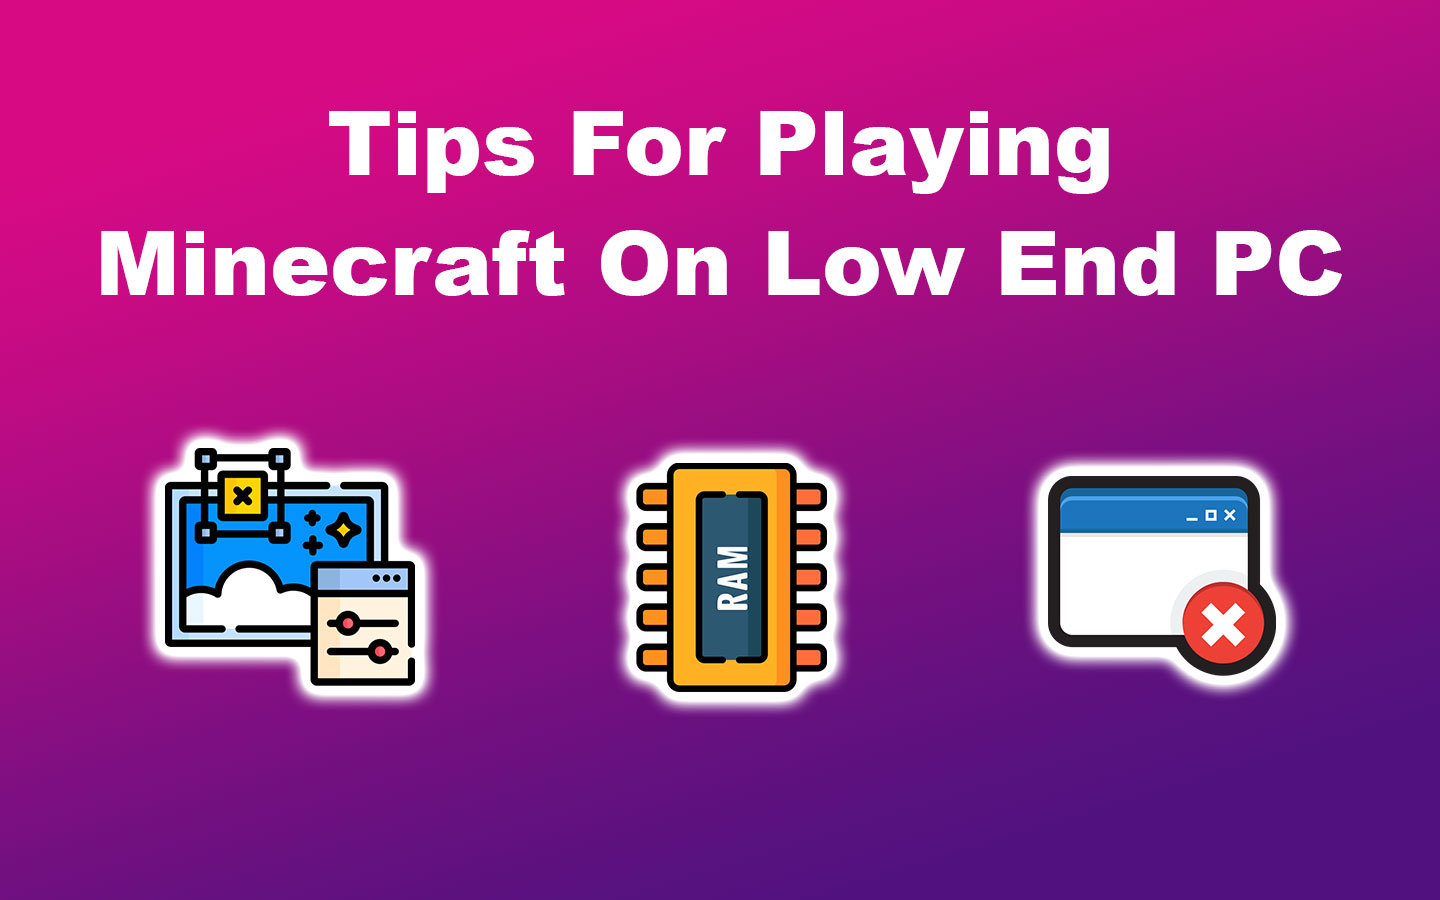 Tips For Playing Minecraft On Low End PC